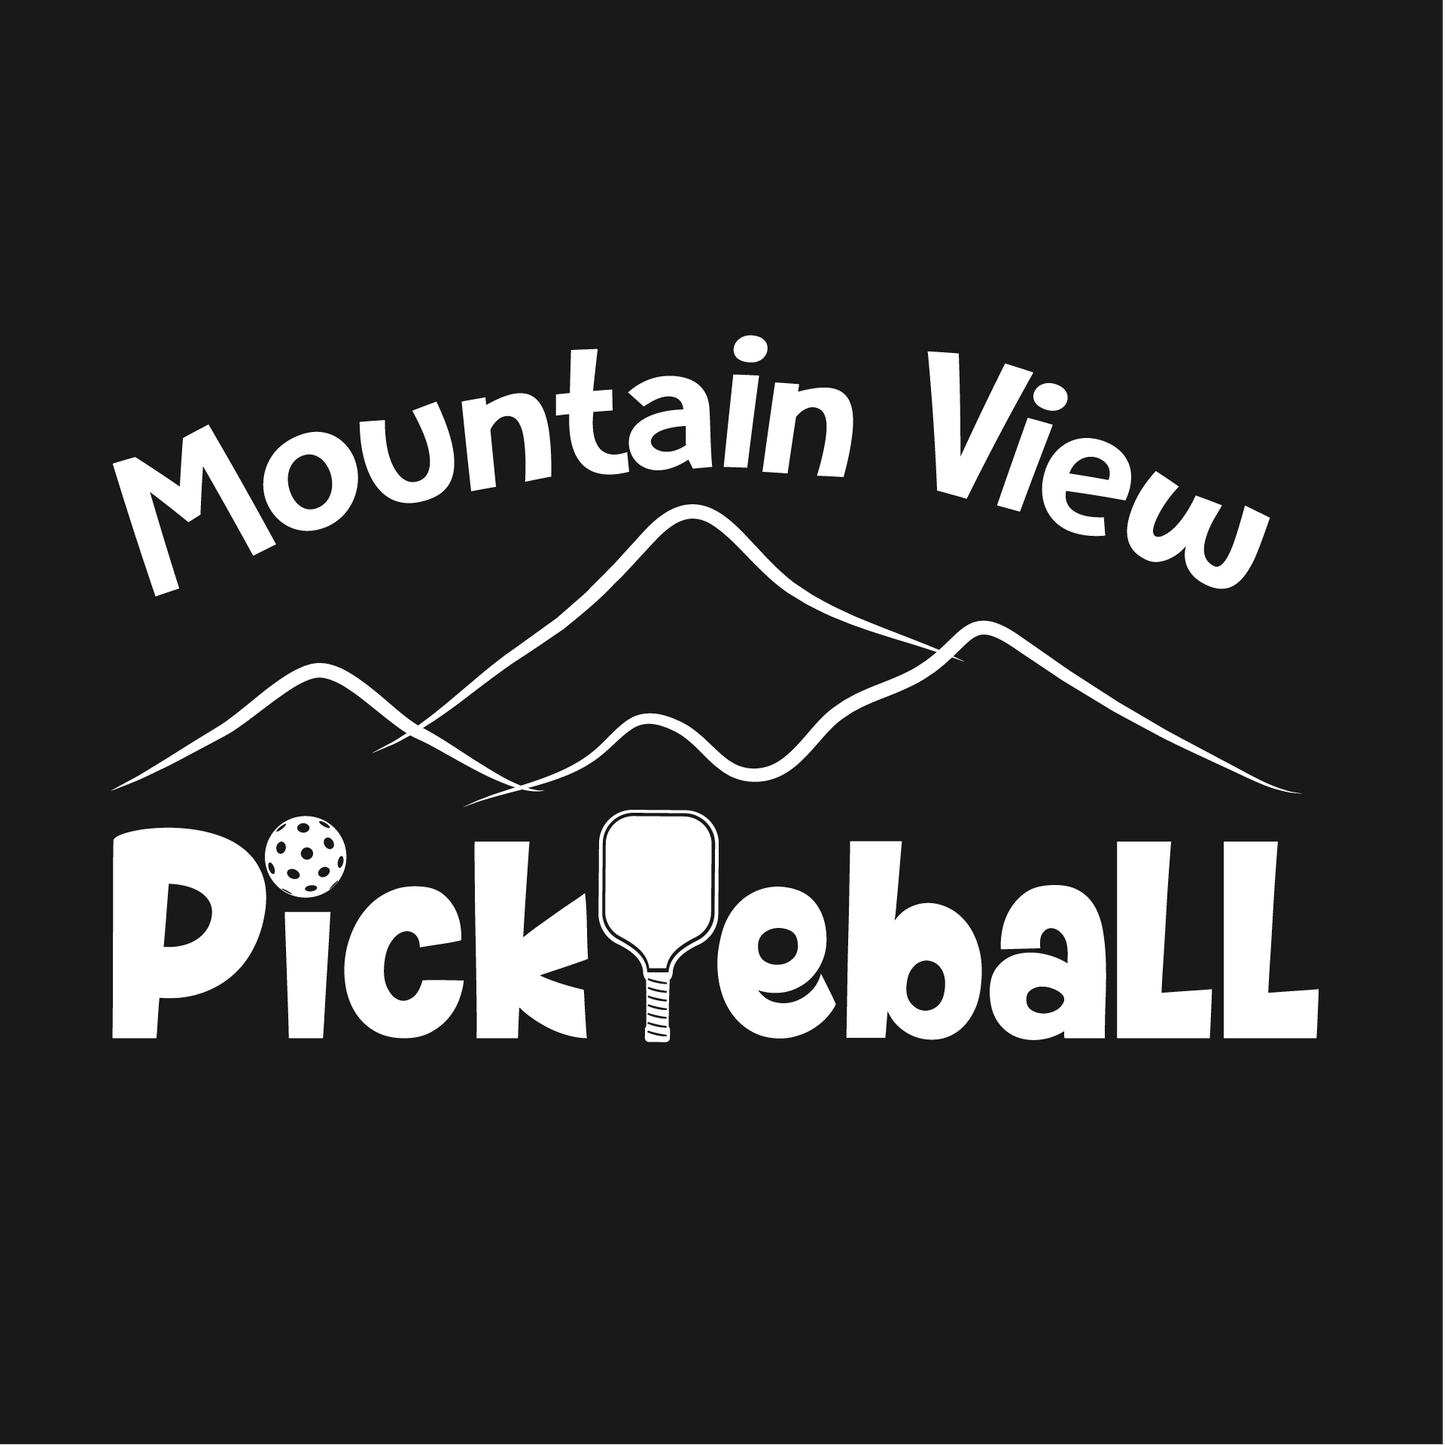 Mountain View Pickleball Club | Women’s Short Sleeve Crewneck Athletic Shirts | 100% Polyester